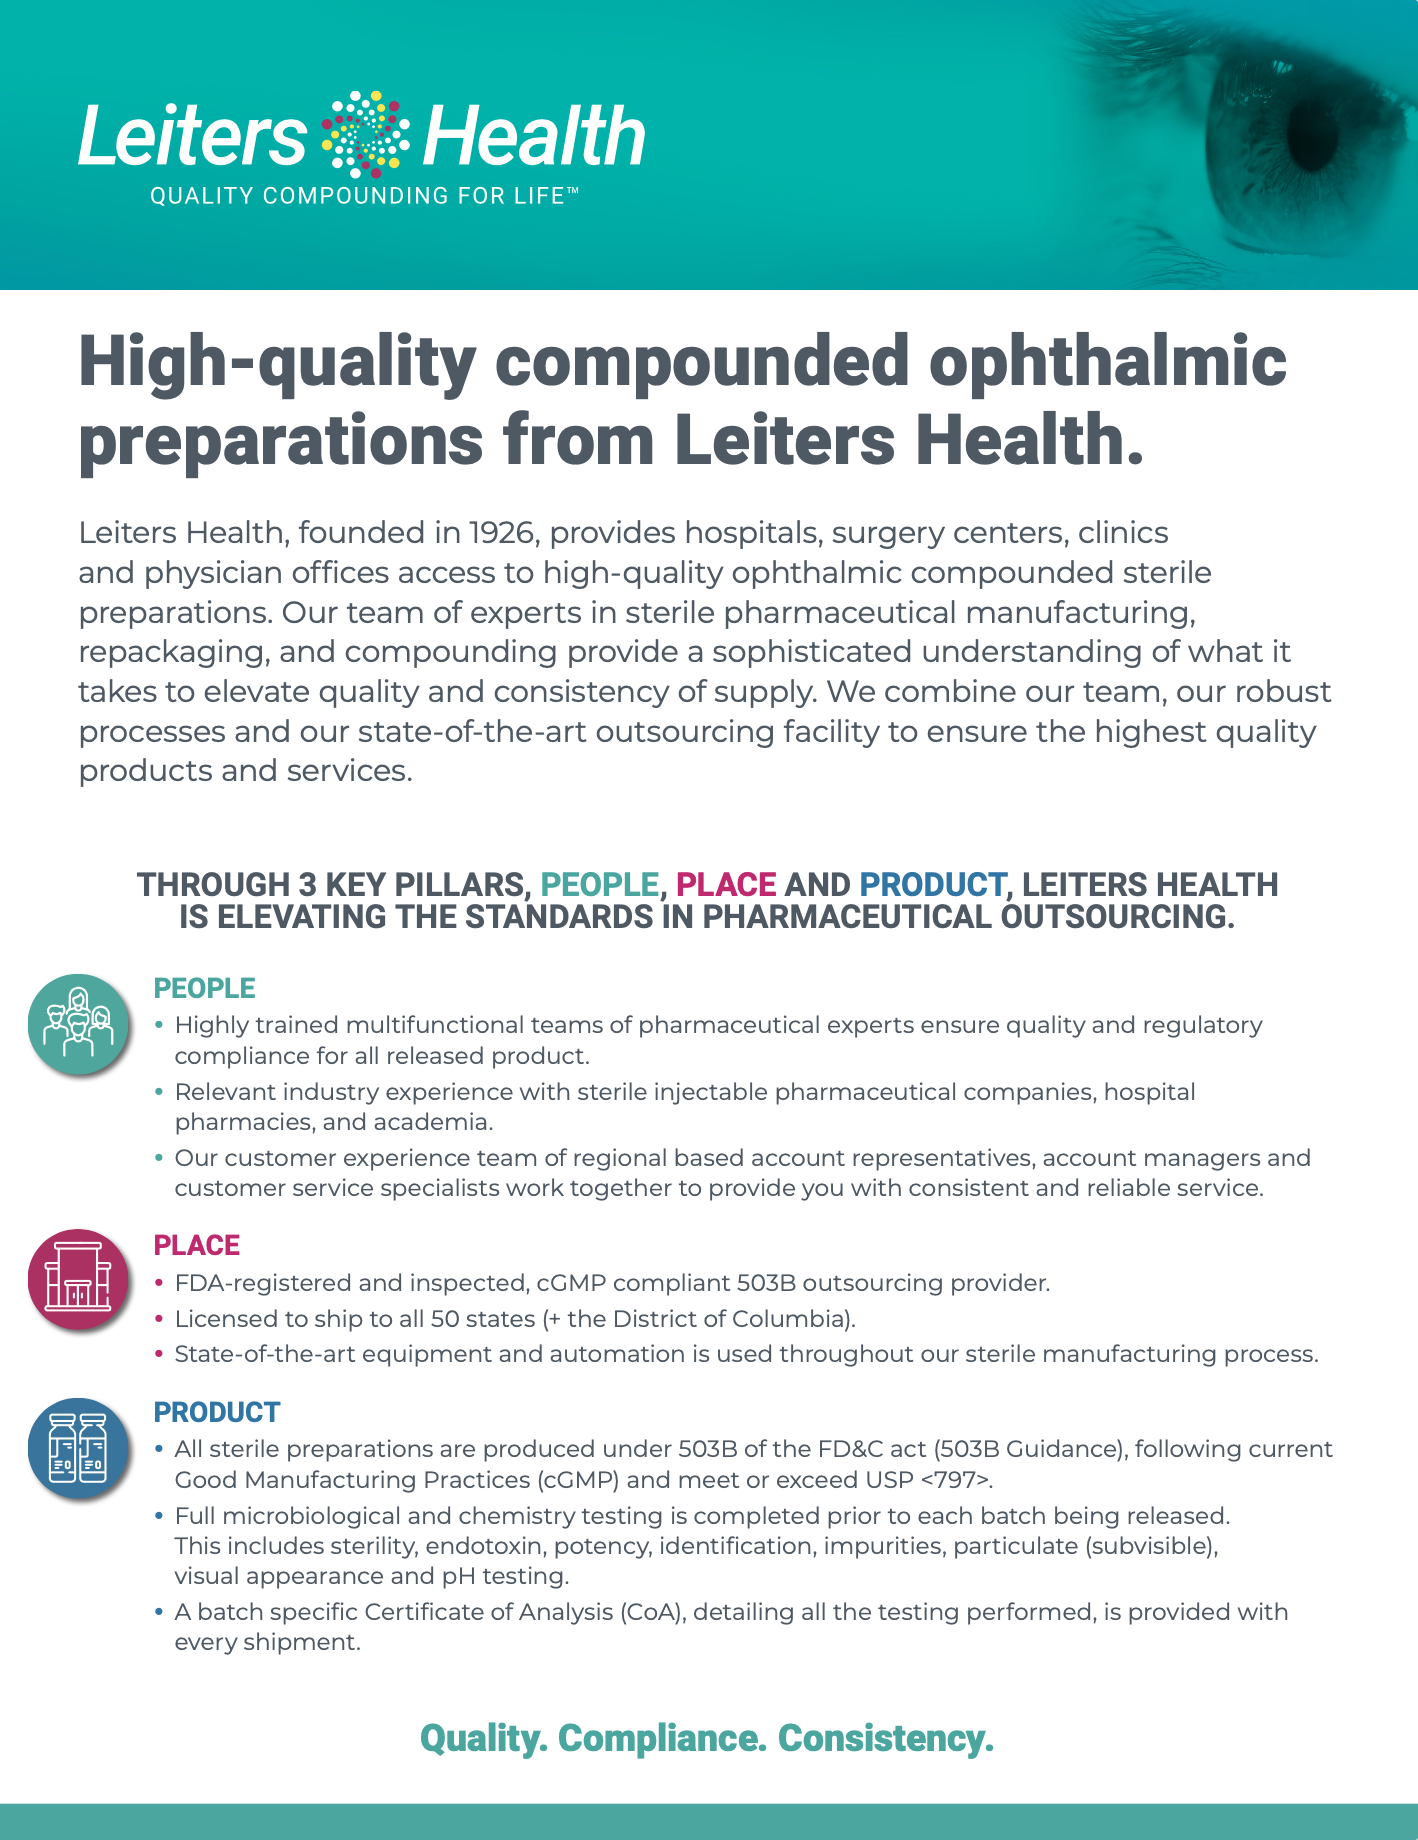 Leiters Health Ophthalmic Products